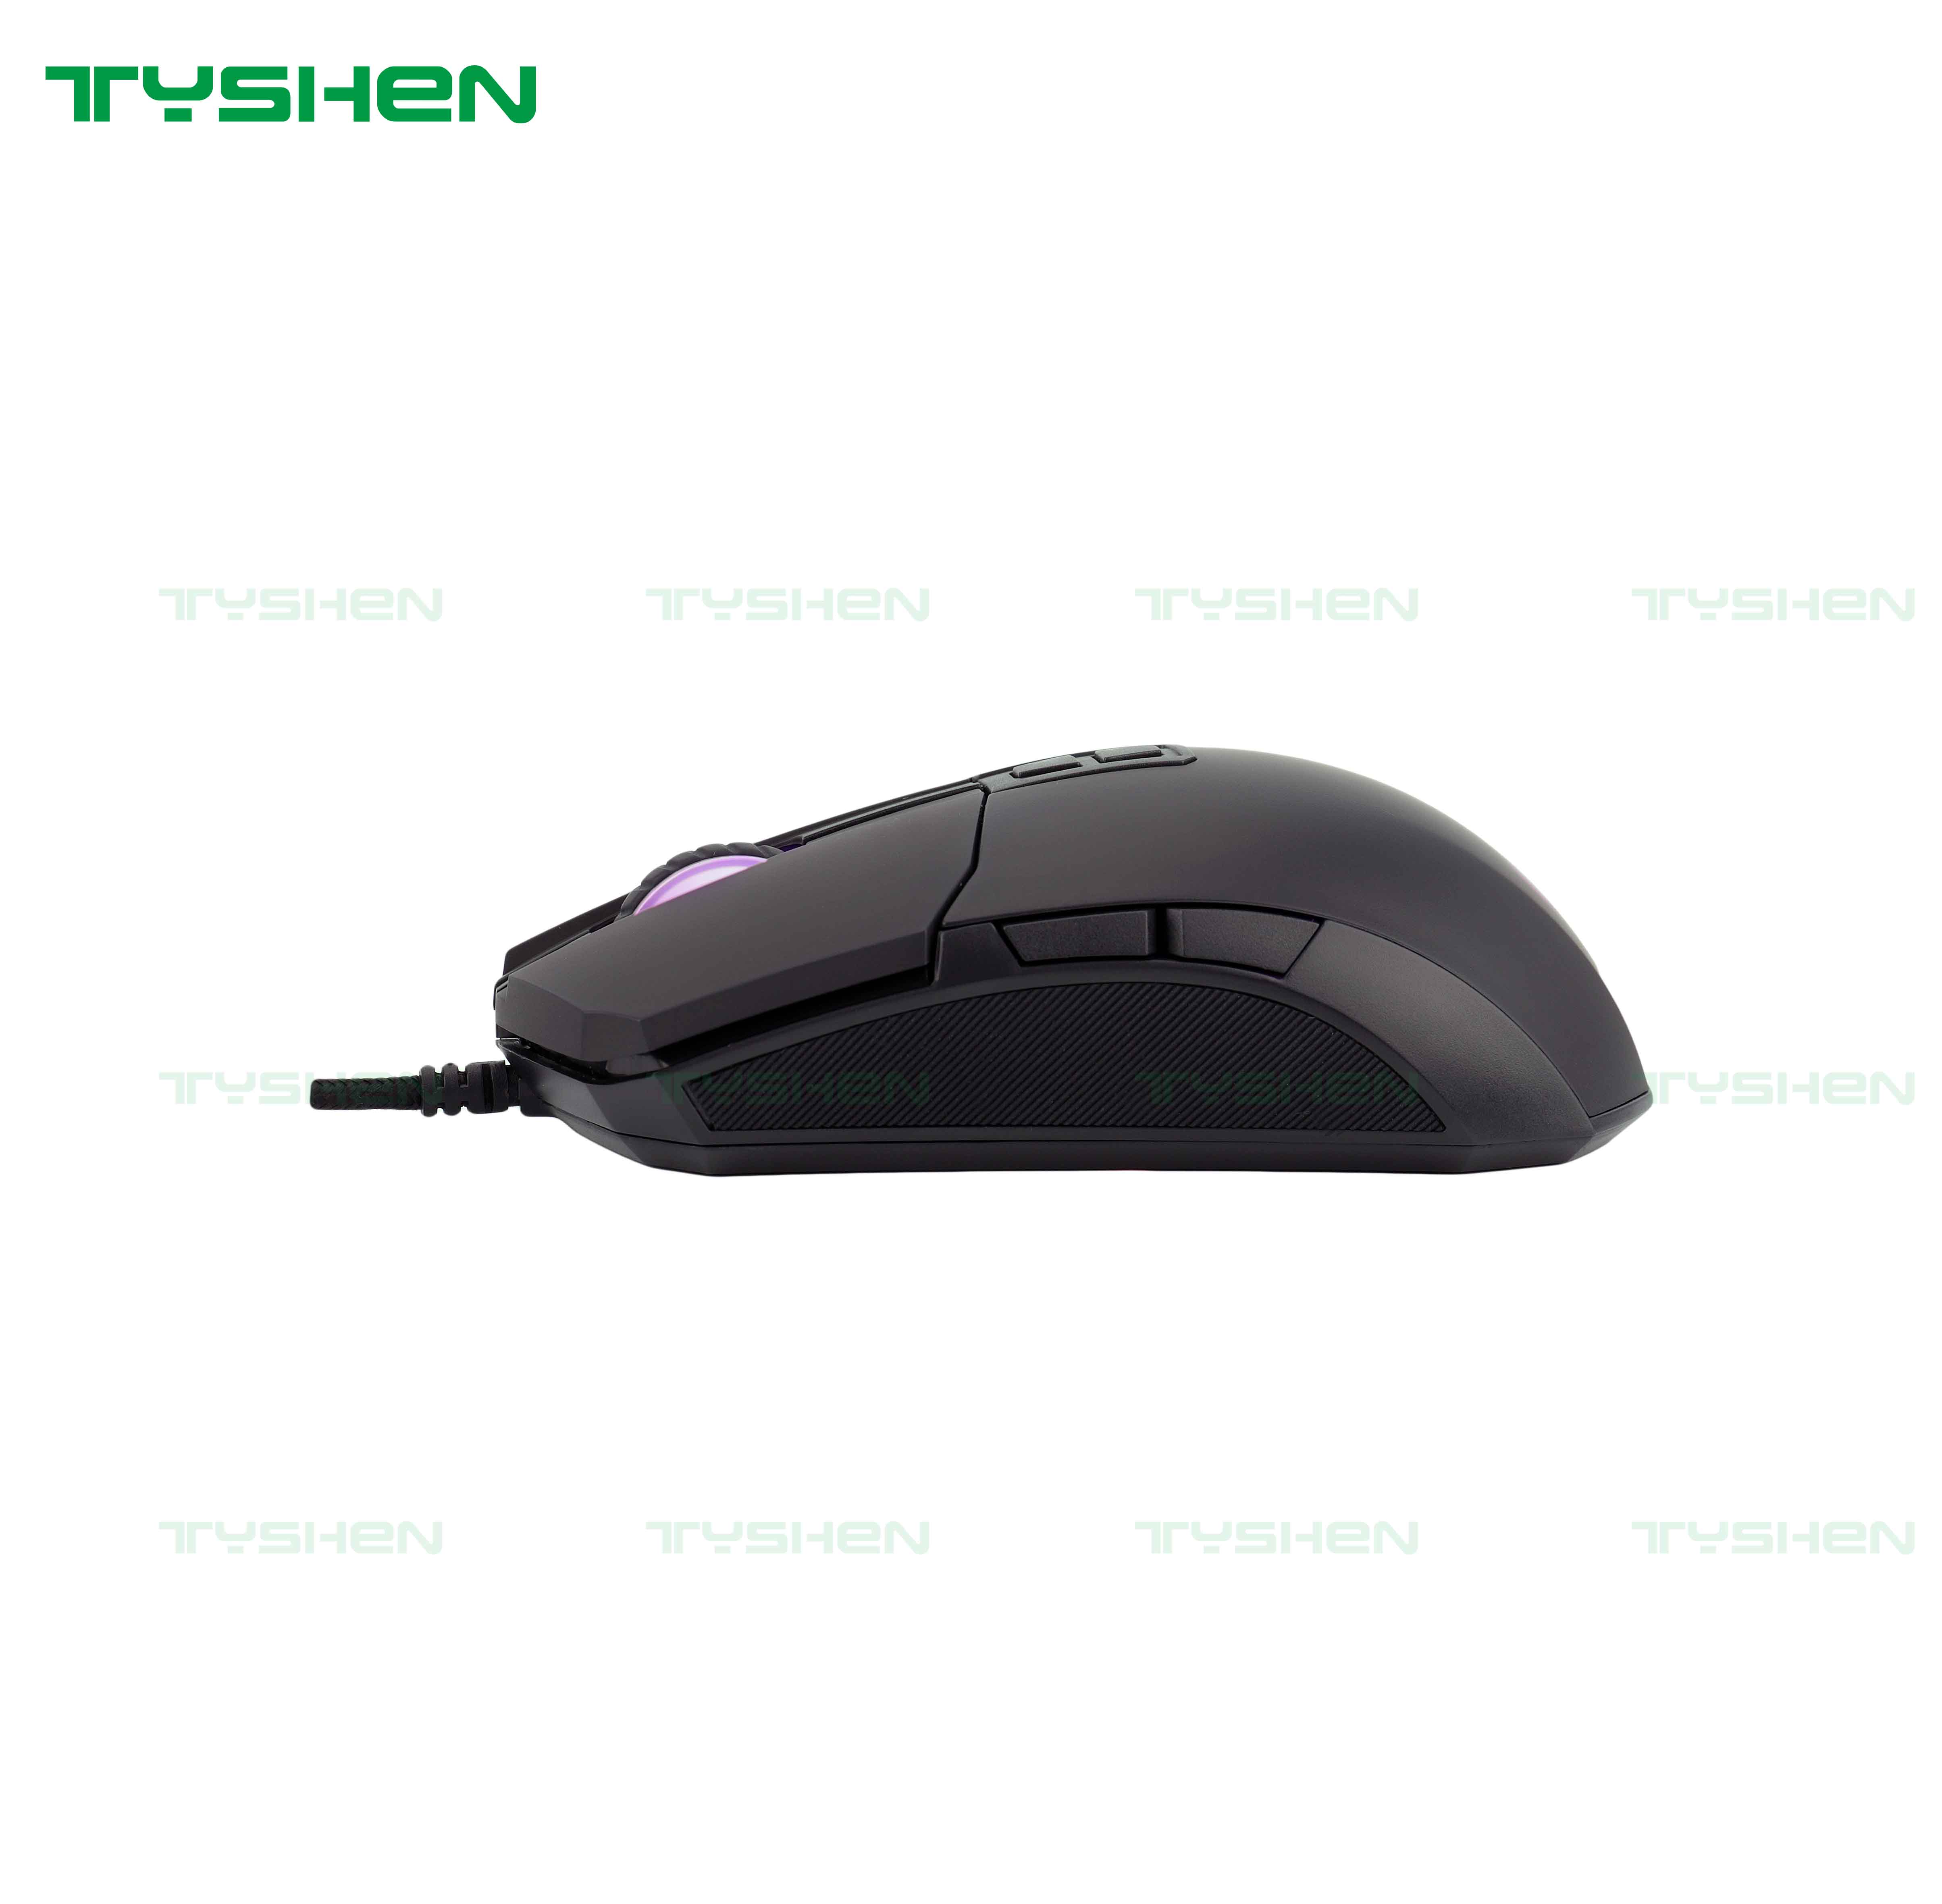 High End RGB Gaming Mouse 3200 DPI-China Gaming Mouse Factory